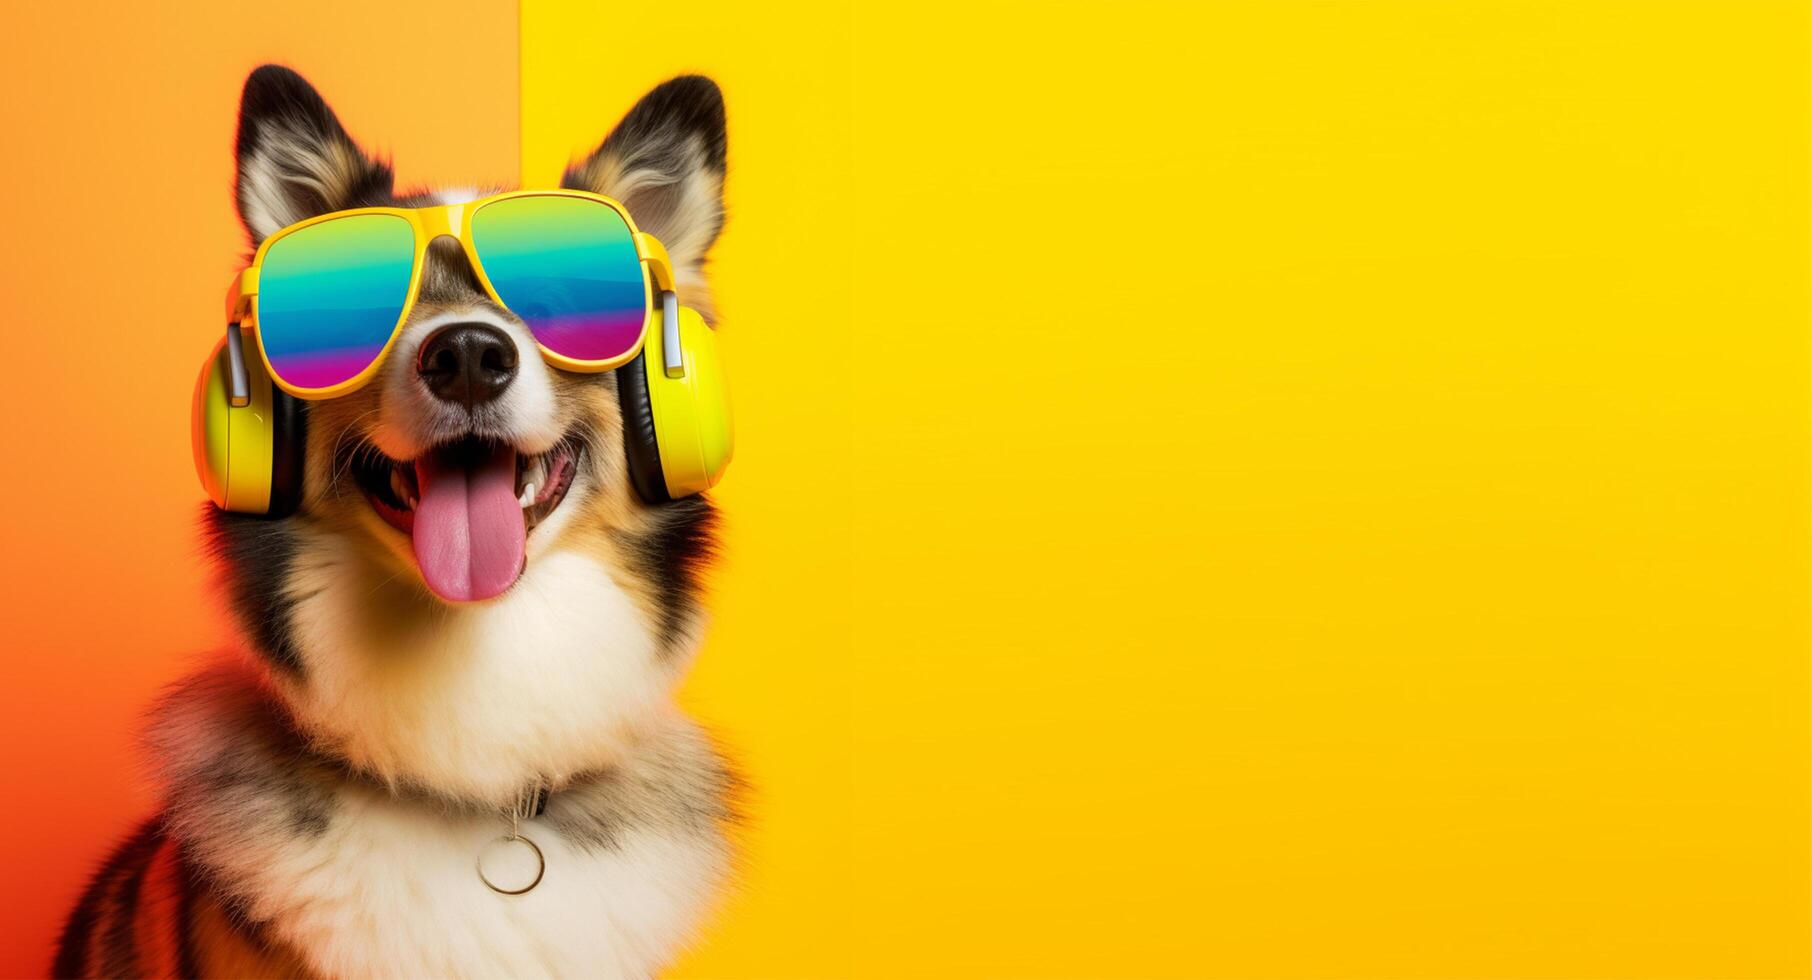 close up portrait of dog wearing glasses and headset. isolated on orange and yellow background, with copyspace. Cheerful concept with listening to music. photo